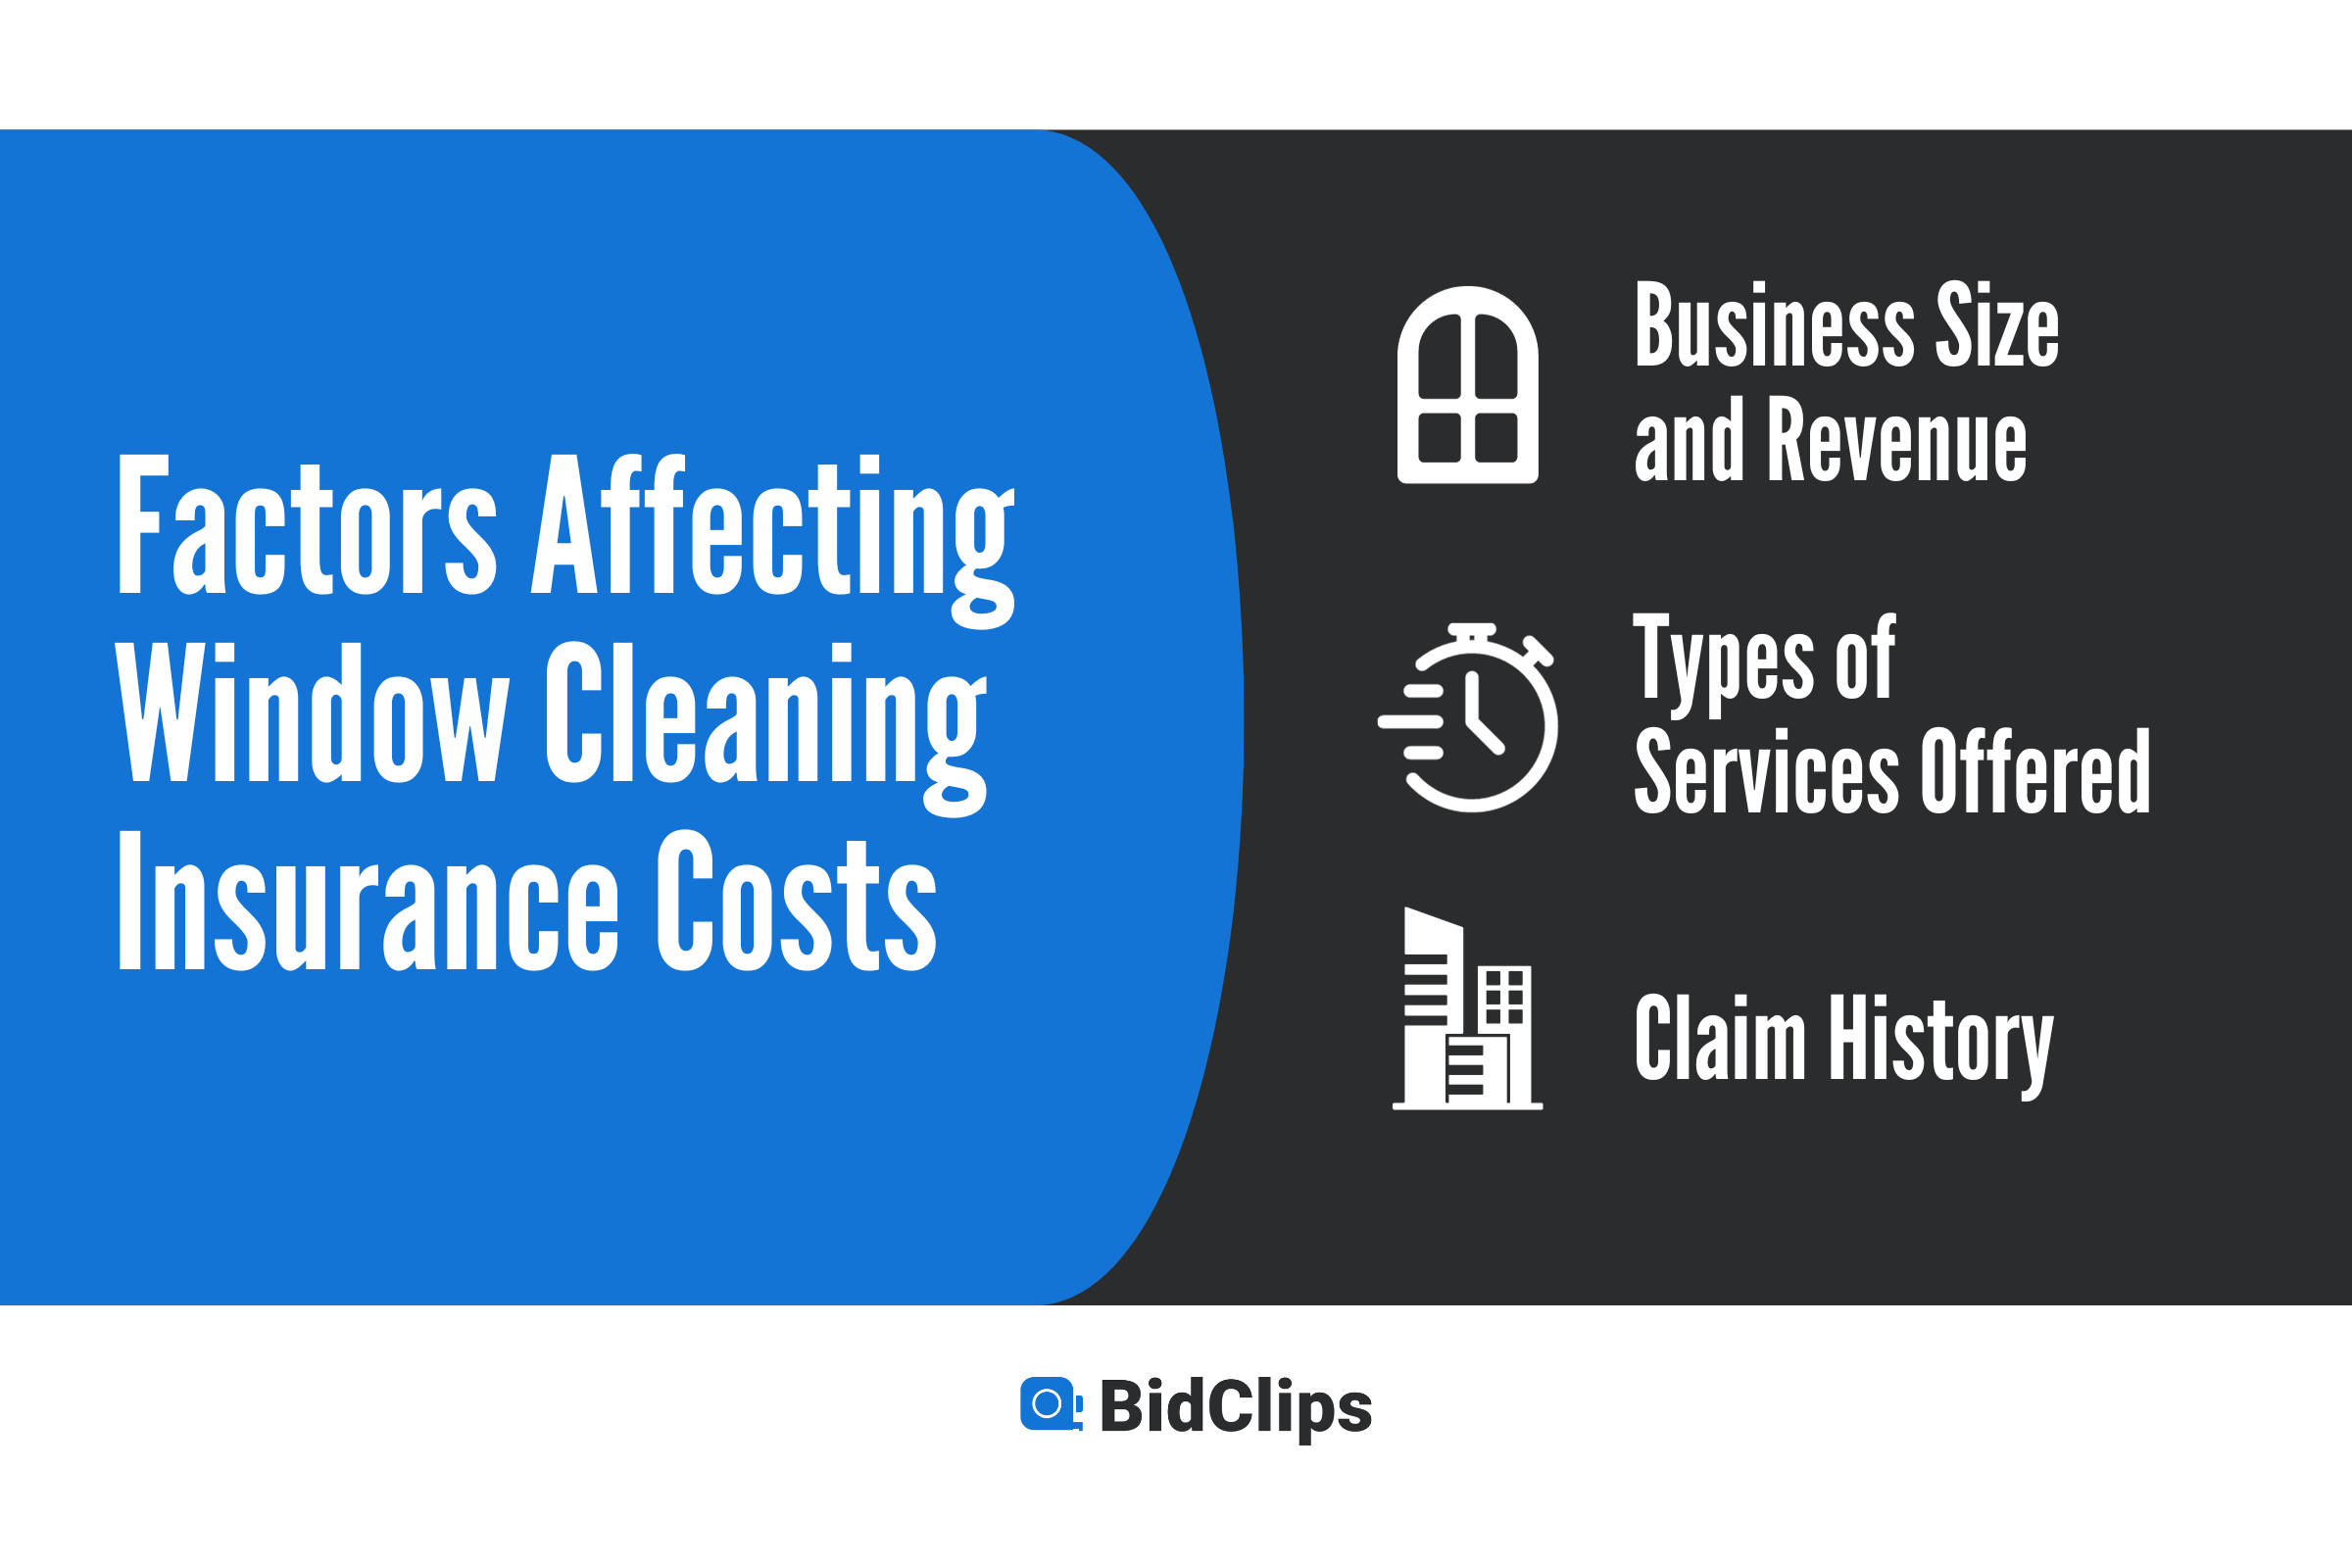 Factors affecting Window Cleaning Insurance Costs